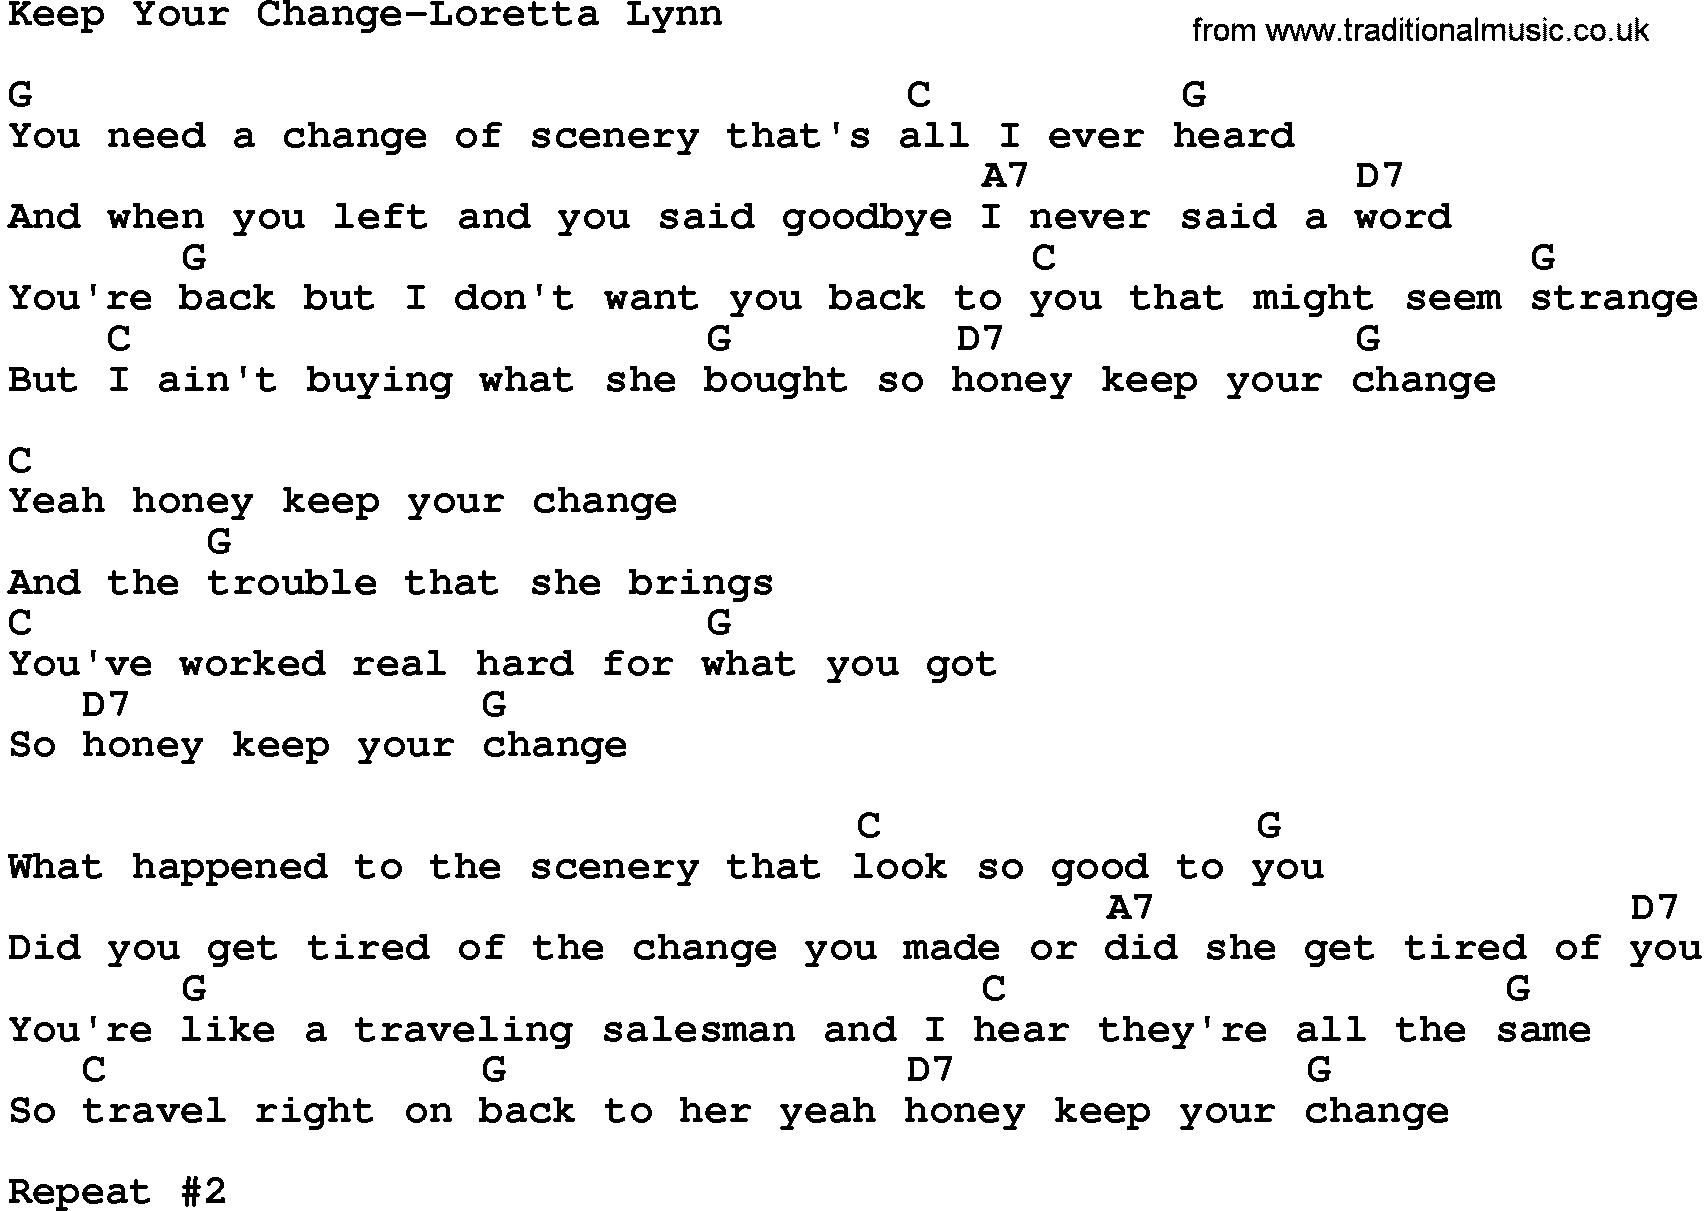 Country music song: Keep Your Change-Loretta Lynn lyrics and chords